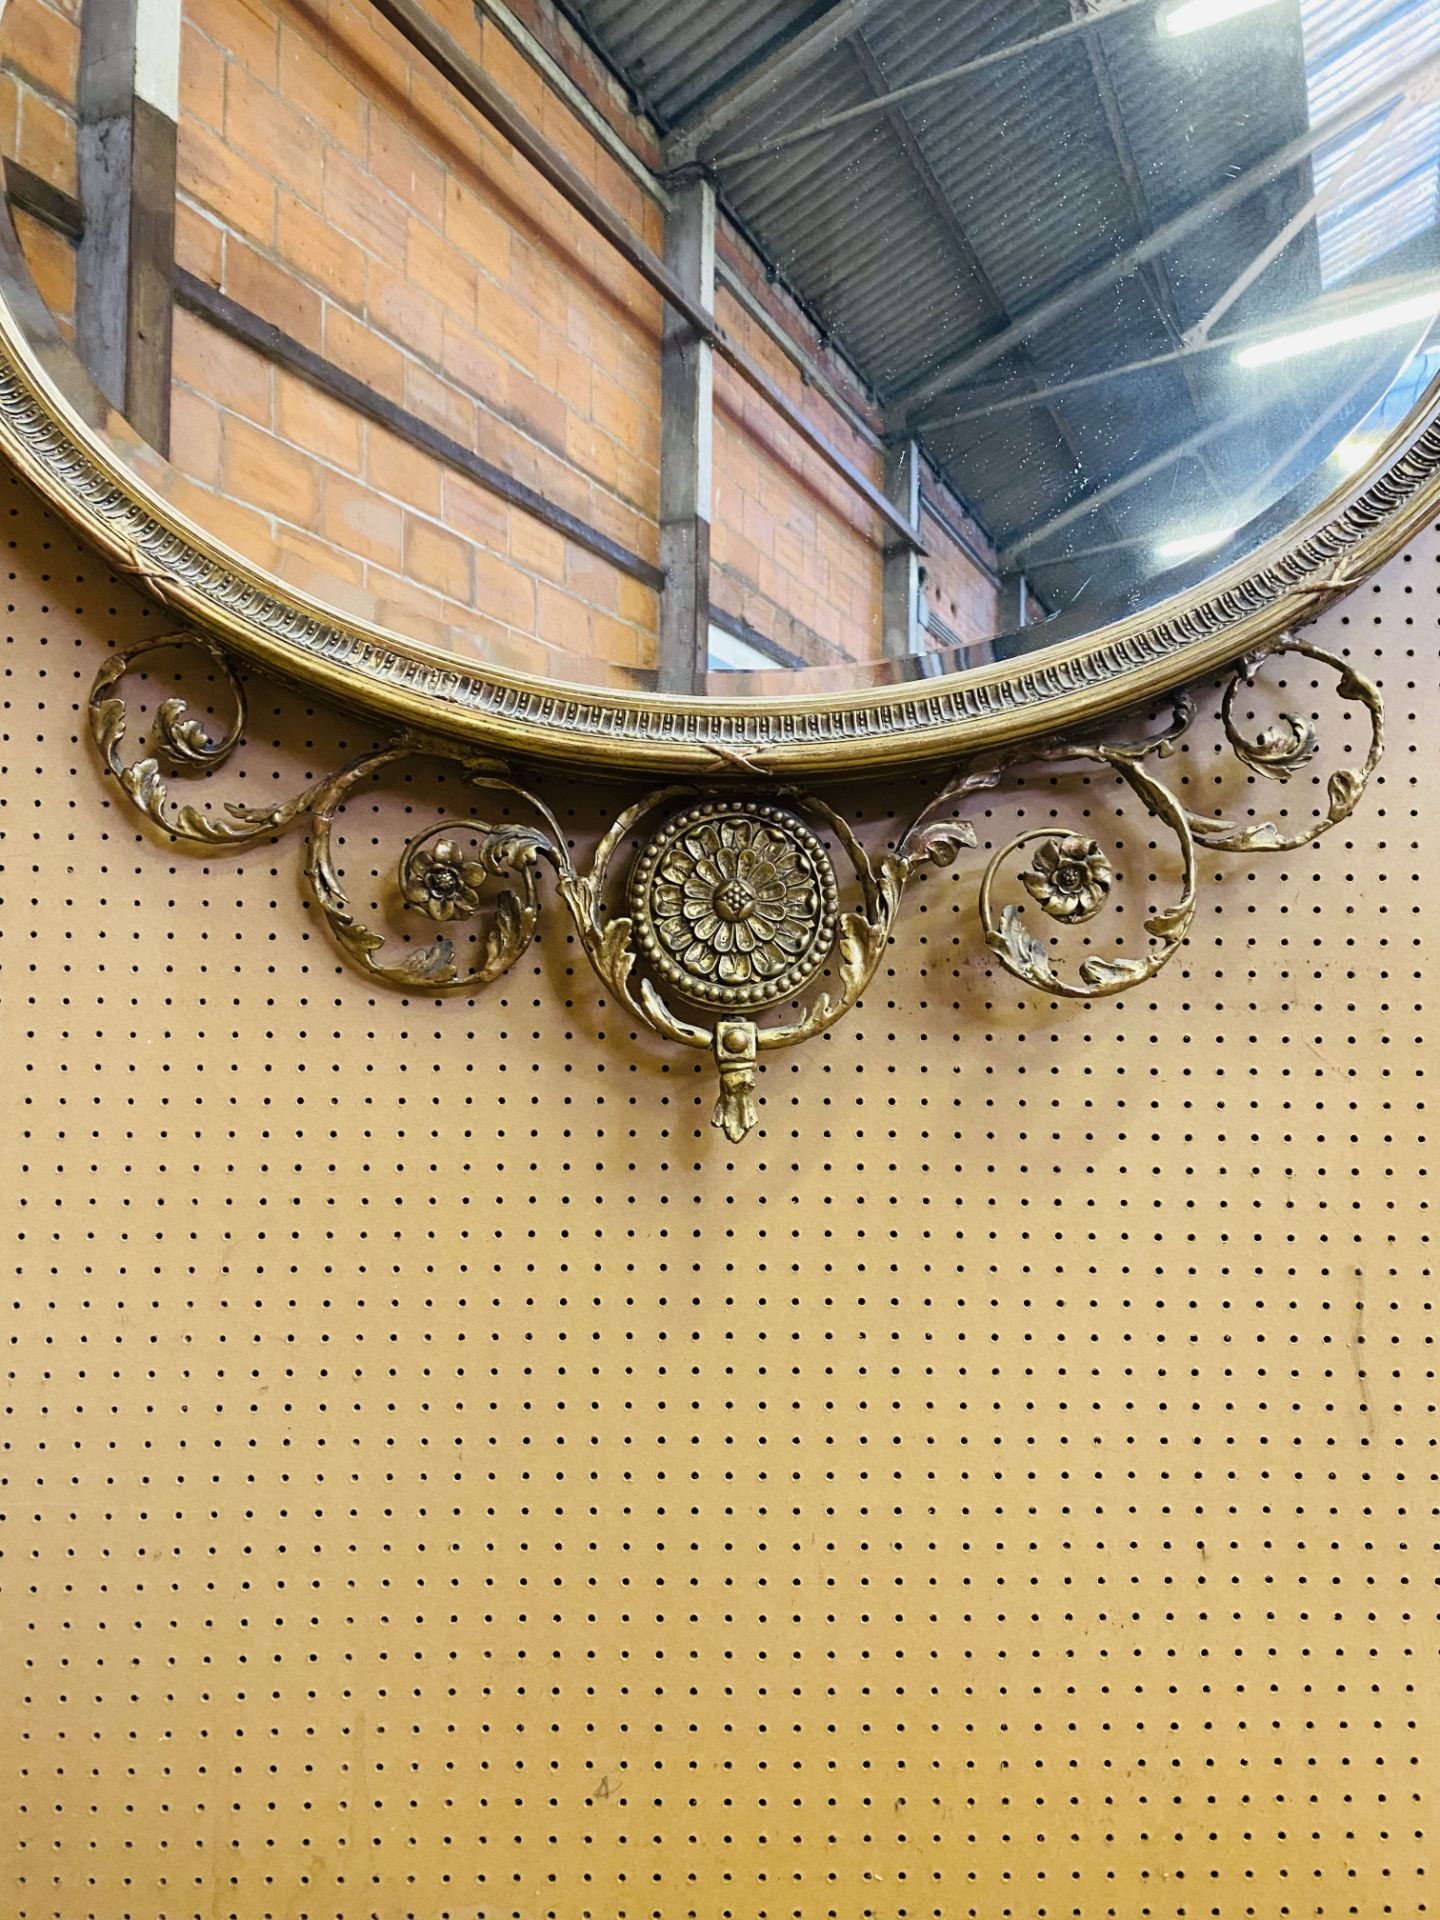 19th century oval mirror - Image 2 of 4